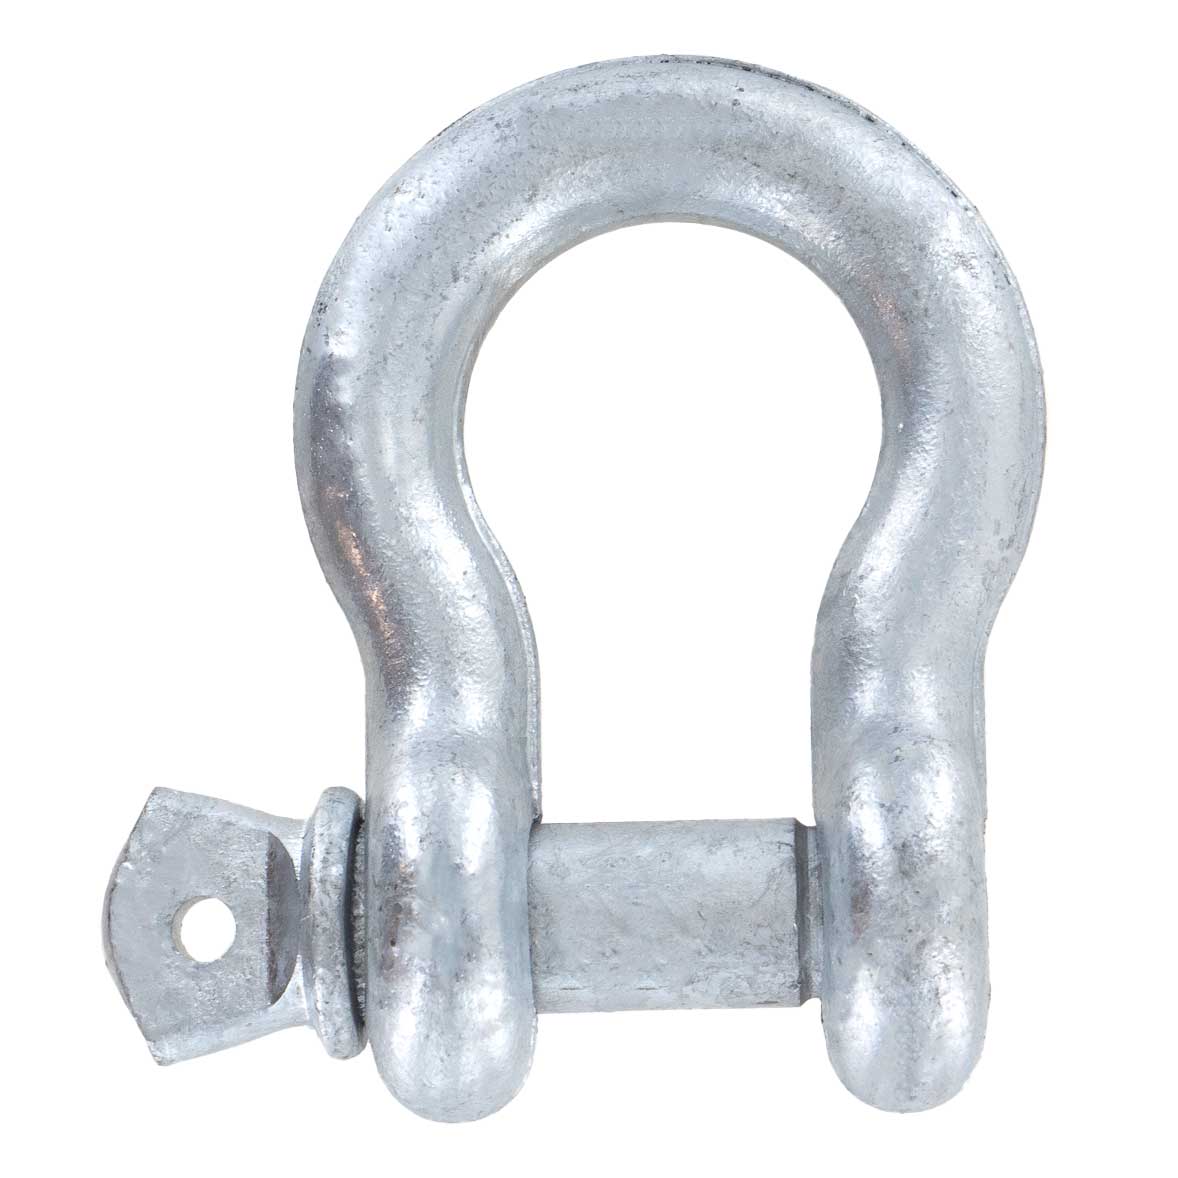 1-1/2" Galvanized Screw Pin Anchor Shackle - 17 Ton rear view